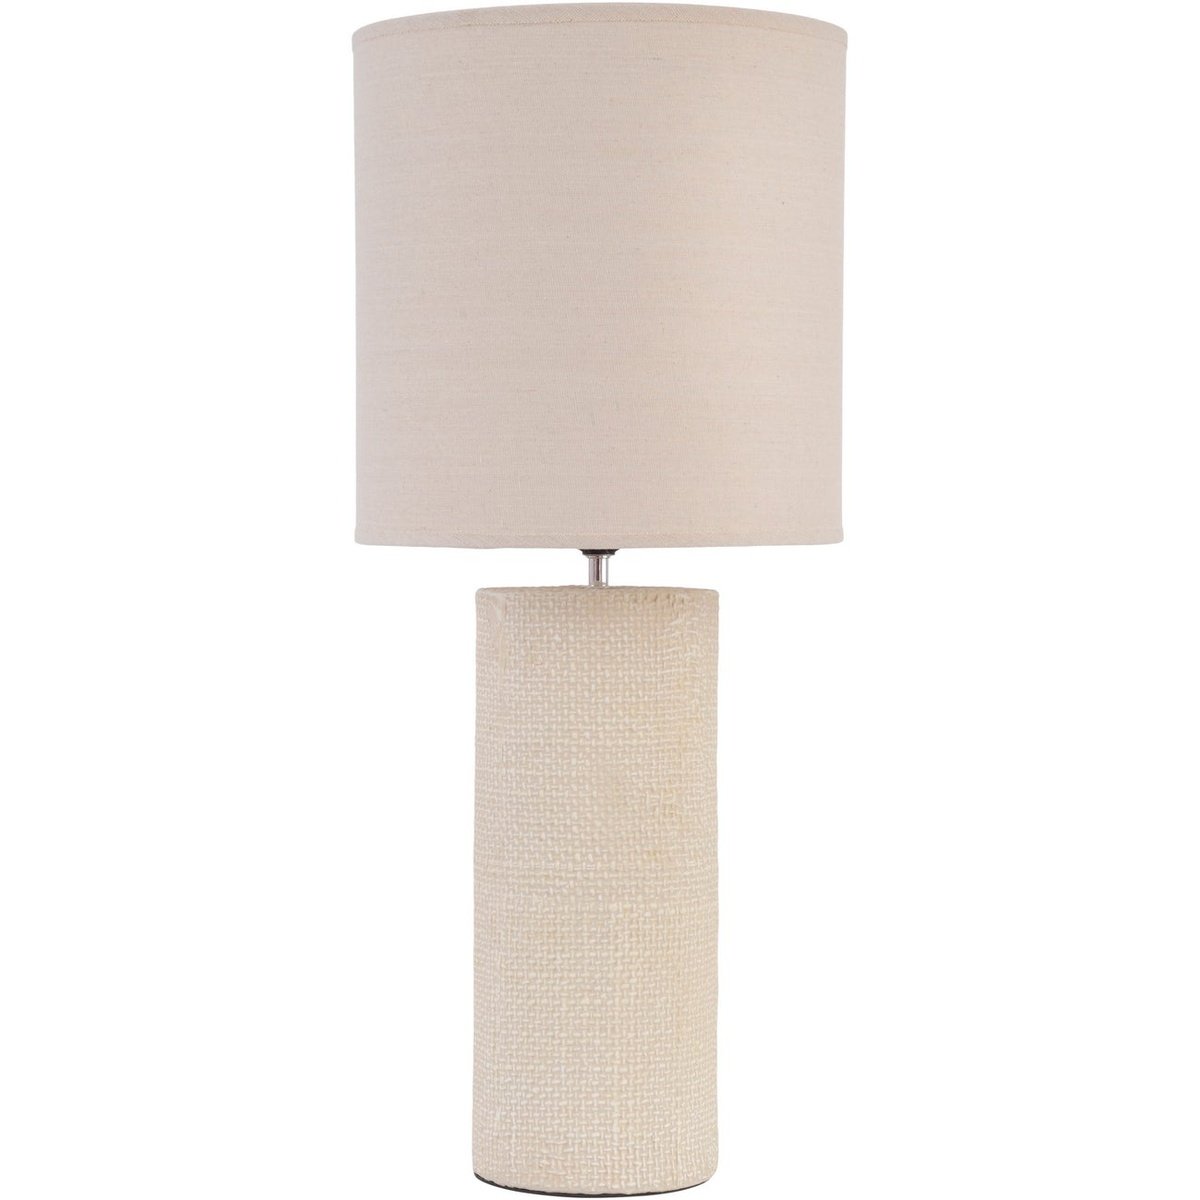 Tall Cream Textured Porcelain Table Lamp With Shade  E27 60W